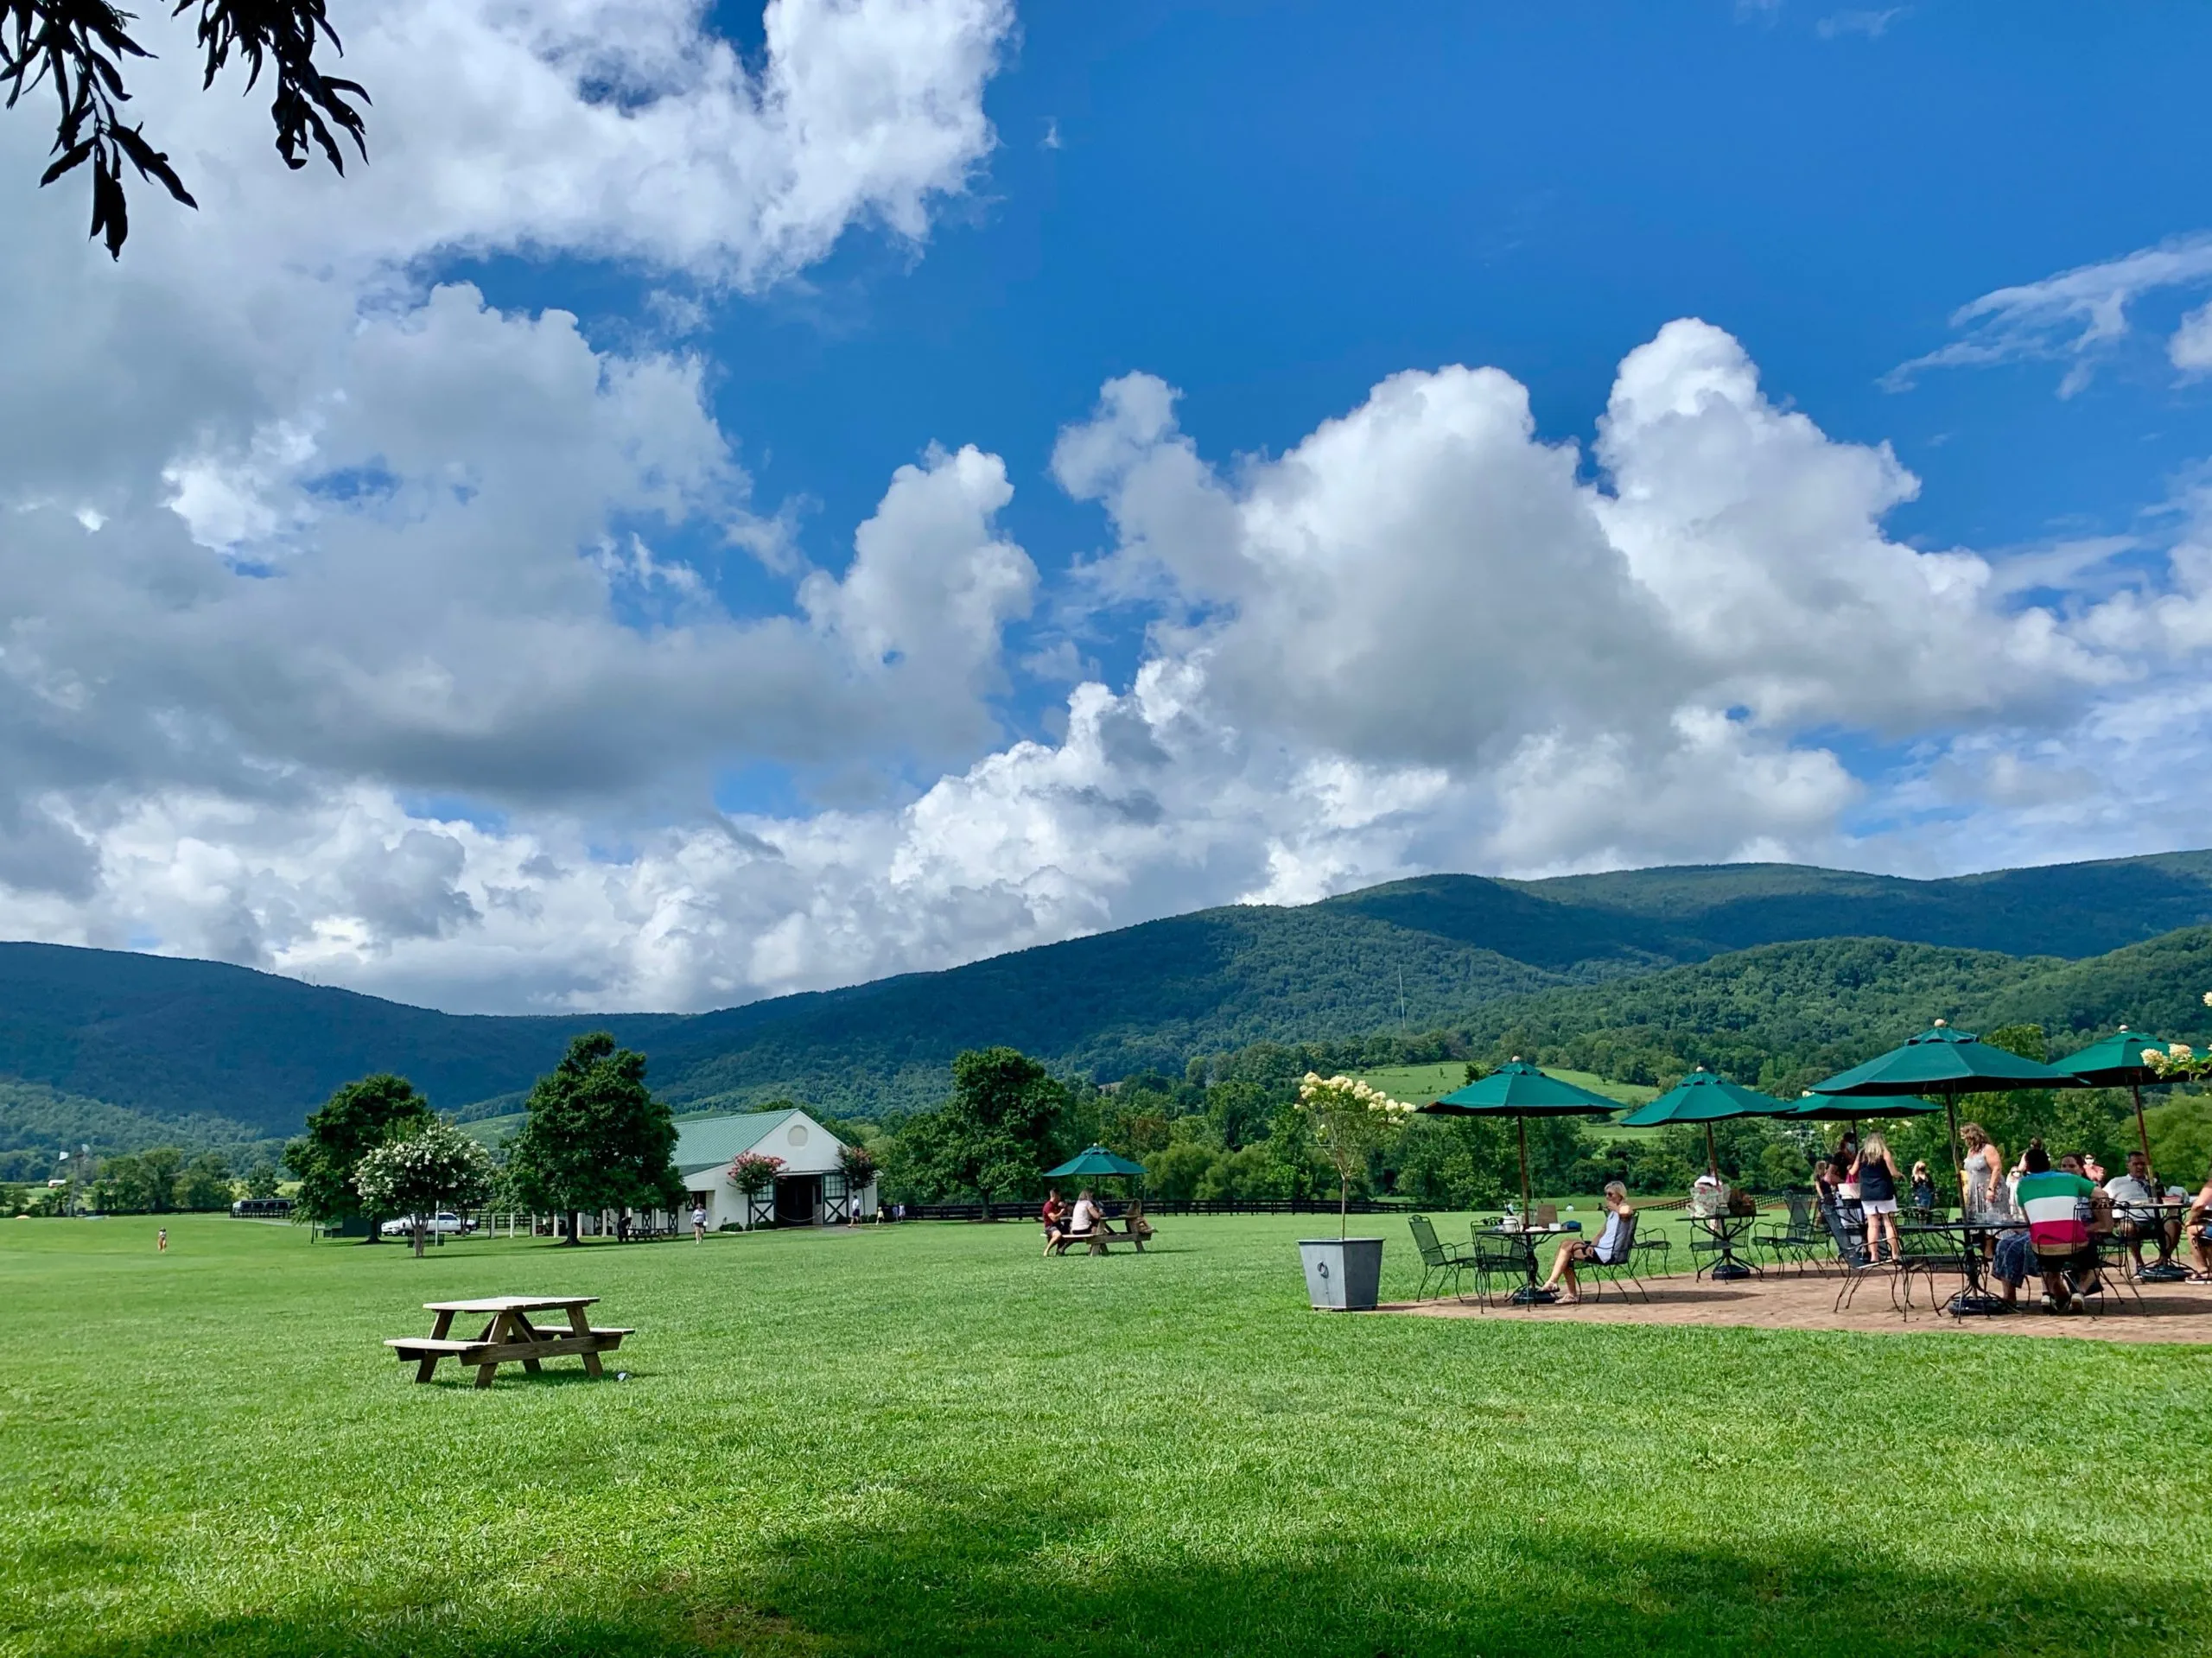 The mountain-surrounding patio area, fields, and stables at King Family Vineyard